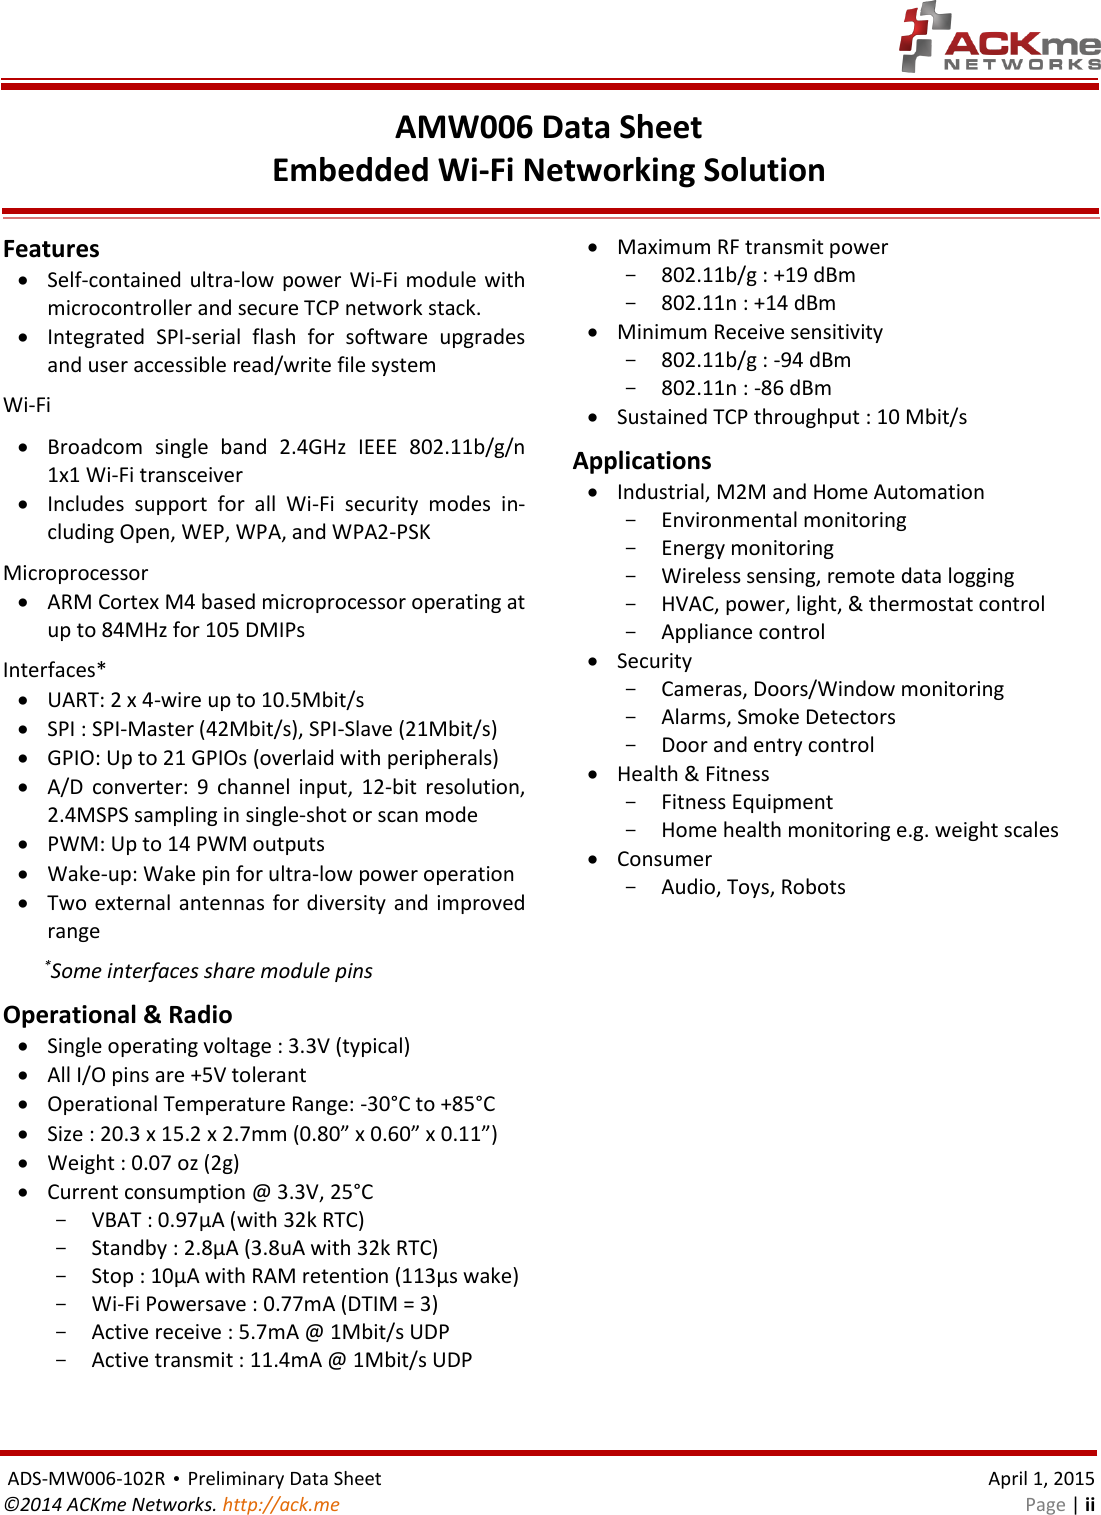    ADS-MW006-102R • Preliminary Data Sheet    April 1, 2015 ©2014 ACKme Networks. http://ack.me    Page | ii AMW006 Data Sheet Embedded Wi-Fi Networking Solution  Features  Self-contained ultra-low  power Wi-Fi module with microcontroller and secure TCP network stack.  Integrated  SPI-serial  flash  for  software  upgrades and user accessible read/write file system Wi-Fi  Broadcom  single  band  2.4GHz  IEEE  802.11b/g/n 1x1 Wi-Fi transceiver  Includes  support  for  all  Wi-Fi  security  modes  in-cluding Open, WEP, WPA, and WPA2-PSK Microprocessor  ARM Cortex M4 based microprocessor operating at up to 84MHz for 105 DMIPs  Interfaces*  UART: 2 x 4-wire up to 10.5Mbit/s  SPI : SPI-Master (42Mbit/s), SPI-Slave (21Mbit/s)   GPIO: Up to 21 GPIOs (overlaid with peripherals)  A/D  converter:  9  channel  input,  12-bit  resolution, 2.4MSPS sampling in single-shot or scan mode   PWM: Up to 14 PWM outputs   Wake-up: Wake pin for ultra-low power operation  Two external antennas for diversity  and improved range      *Some interfaces share module pins Operational &amp; Radio  Single operating voltage : 3.3V (typical)  All I/O pins are +5V tolerant  Operational Temperature Range: -30°C to +85°C  Size : 20.3 x 15.2 x 2.7mm (0.80” x 0.60” x 0.11”)  Weight : 0.07 oz (2g)  Current consumption @ 3.3V, 25°C - VBAT : 0.97µA (with 32k RTC) - Standby : 2.8µA (3.8uA with 32k RTC) - Stop : 10µA with RAM retention (113µs wake) - Wi-Fi Powersave : 0.77mA (DTIM = 3) - Active receive : 5.7mA @ 1Mbit/s UDP - Active transmit : 11.4mA @ 1Mbit/s UDP   Maximum RF transmit power - 802.11b/g : +19 dBm - 802.11n : +14 dBm  Minimum Receive sensitivity - 802.11b/g : -94 dBm - 802.11n : -86 dBm  Sustained TCP throughput : 10 Mbit/s Applications  Industrial, M2M and Home Automation - Environmental monitoring - Energy monitoring - Wireless sensing, remote data logging - HVAC, power, light, &amp; thermostat control - Appliance control  Security - Cameras, Doors/Window monitoring - Alarms, Smoke Detectors - Door and entry control  Health &amp; Fitness - Fitness Equipment - Home health monitoring e.g. weight scales  Consumer - Audio, Toys, Robots 